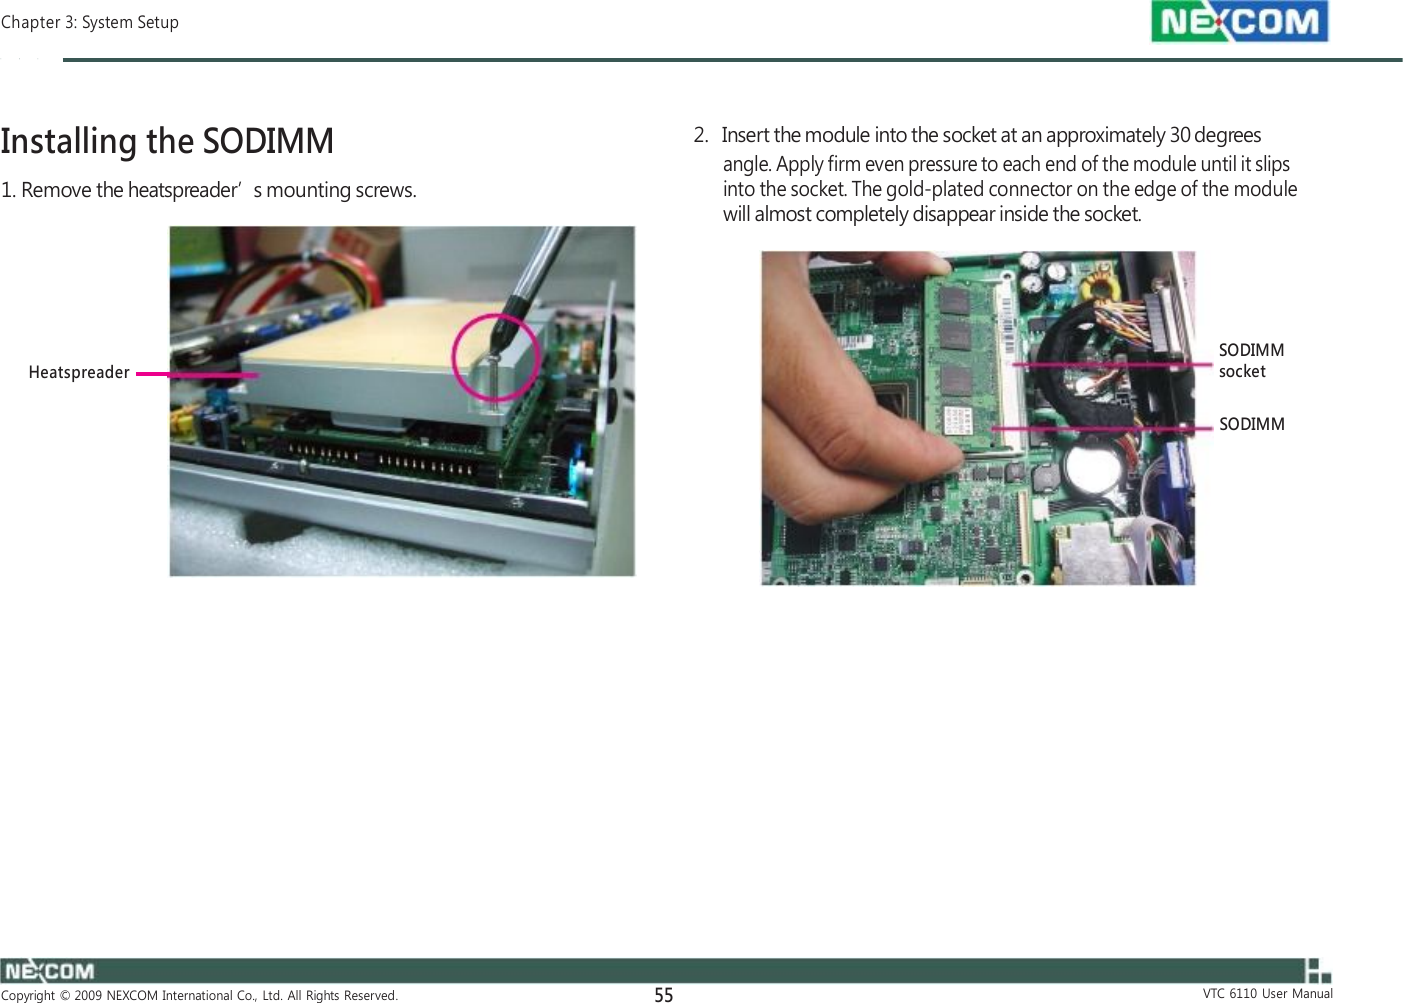  Chapter 3: System Setup    Installing the SODIMM 1. Remove the heatspreader’s mounting screws.       Heatspreader                         Copyright  ©  2009  NEXCOM  International  Co.,  Ltd.  All  Rights  Reserved. 55    2.   Insert the module into the socket at an approximately 30 degrees angle. Apply firm even pressure to each end of the module until it slips into the socket. The gold-plated connector on the edge of the module will almost completely disappear inside the socket.     SODIMM socket  SODIMM                       VTC  6110  User  Manual 